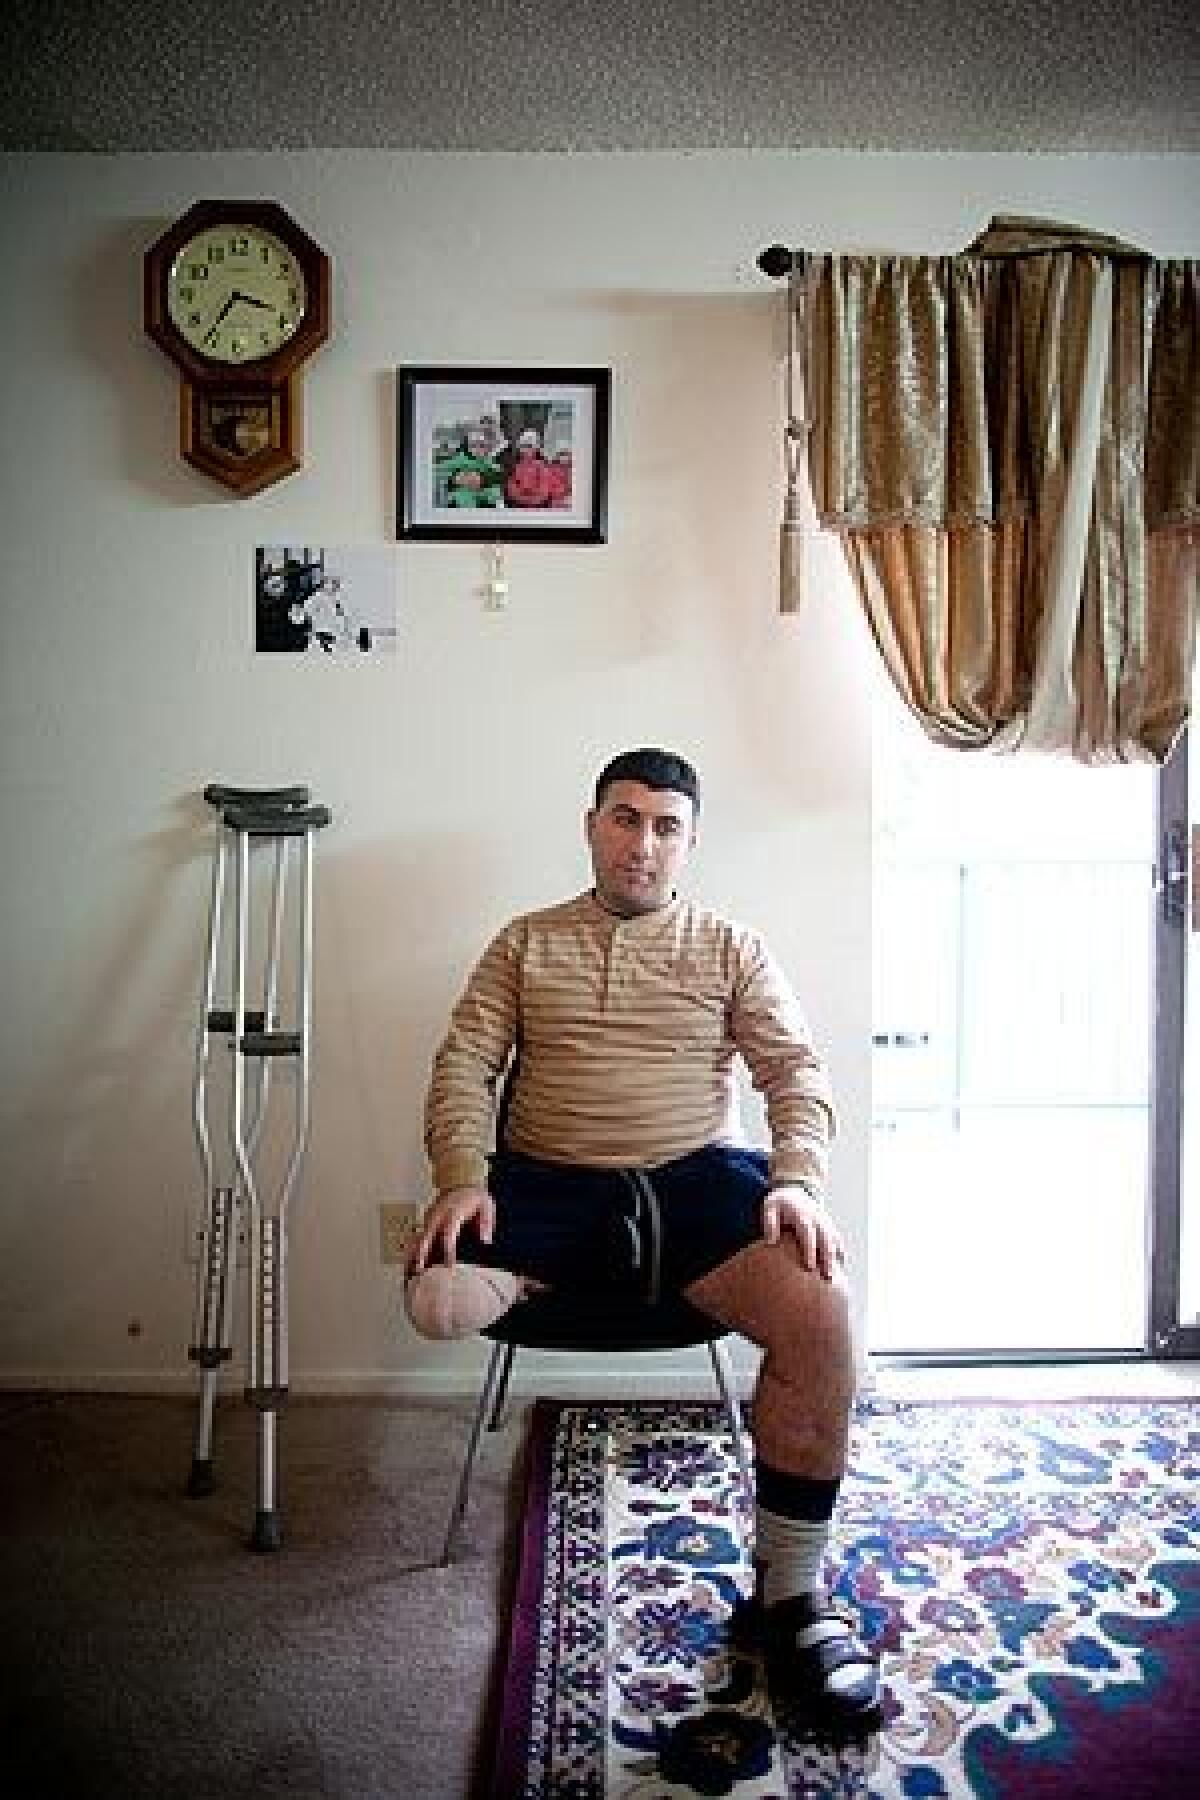 Iraqi interpreter Malek Hadi lost his leg in a 2006 blast while assisting the U.S. military police. He now lives in Arlington, Texas, on $612 in monthly disability payments. "When we were in Iraq, we were exactly like the soldiers," Hadi said. "Why are we treated differently now?"